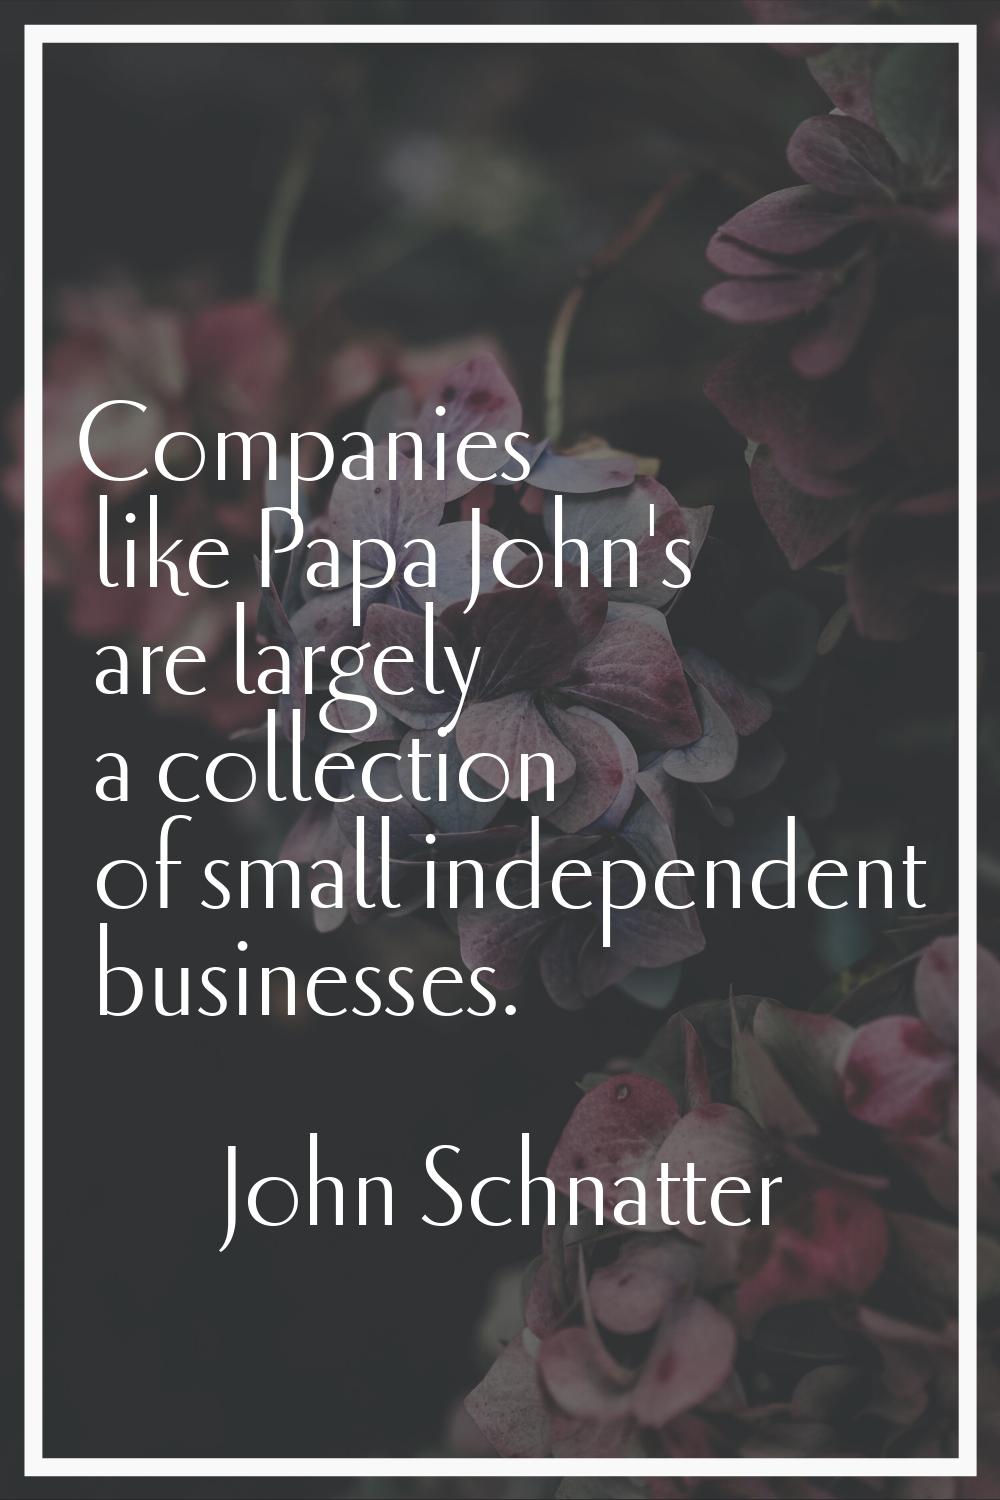 Companies like Papa John's are largely a collection of small independent businesses.